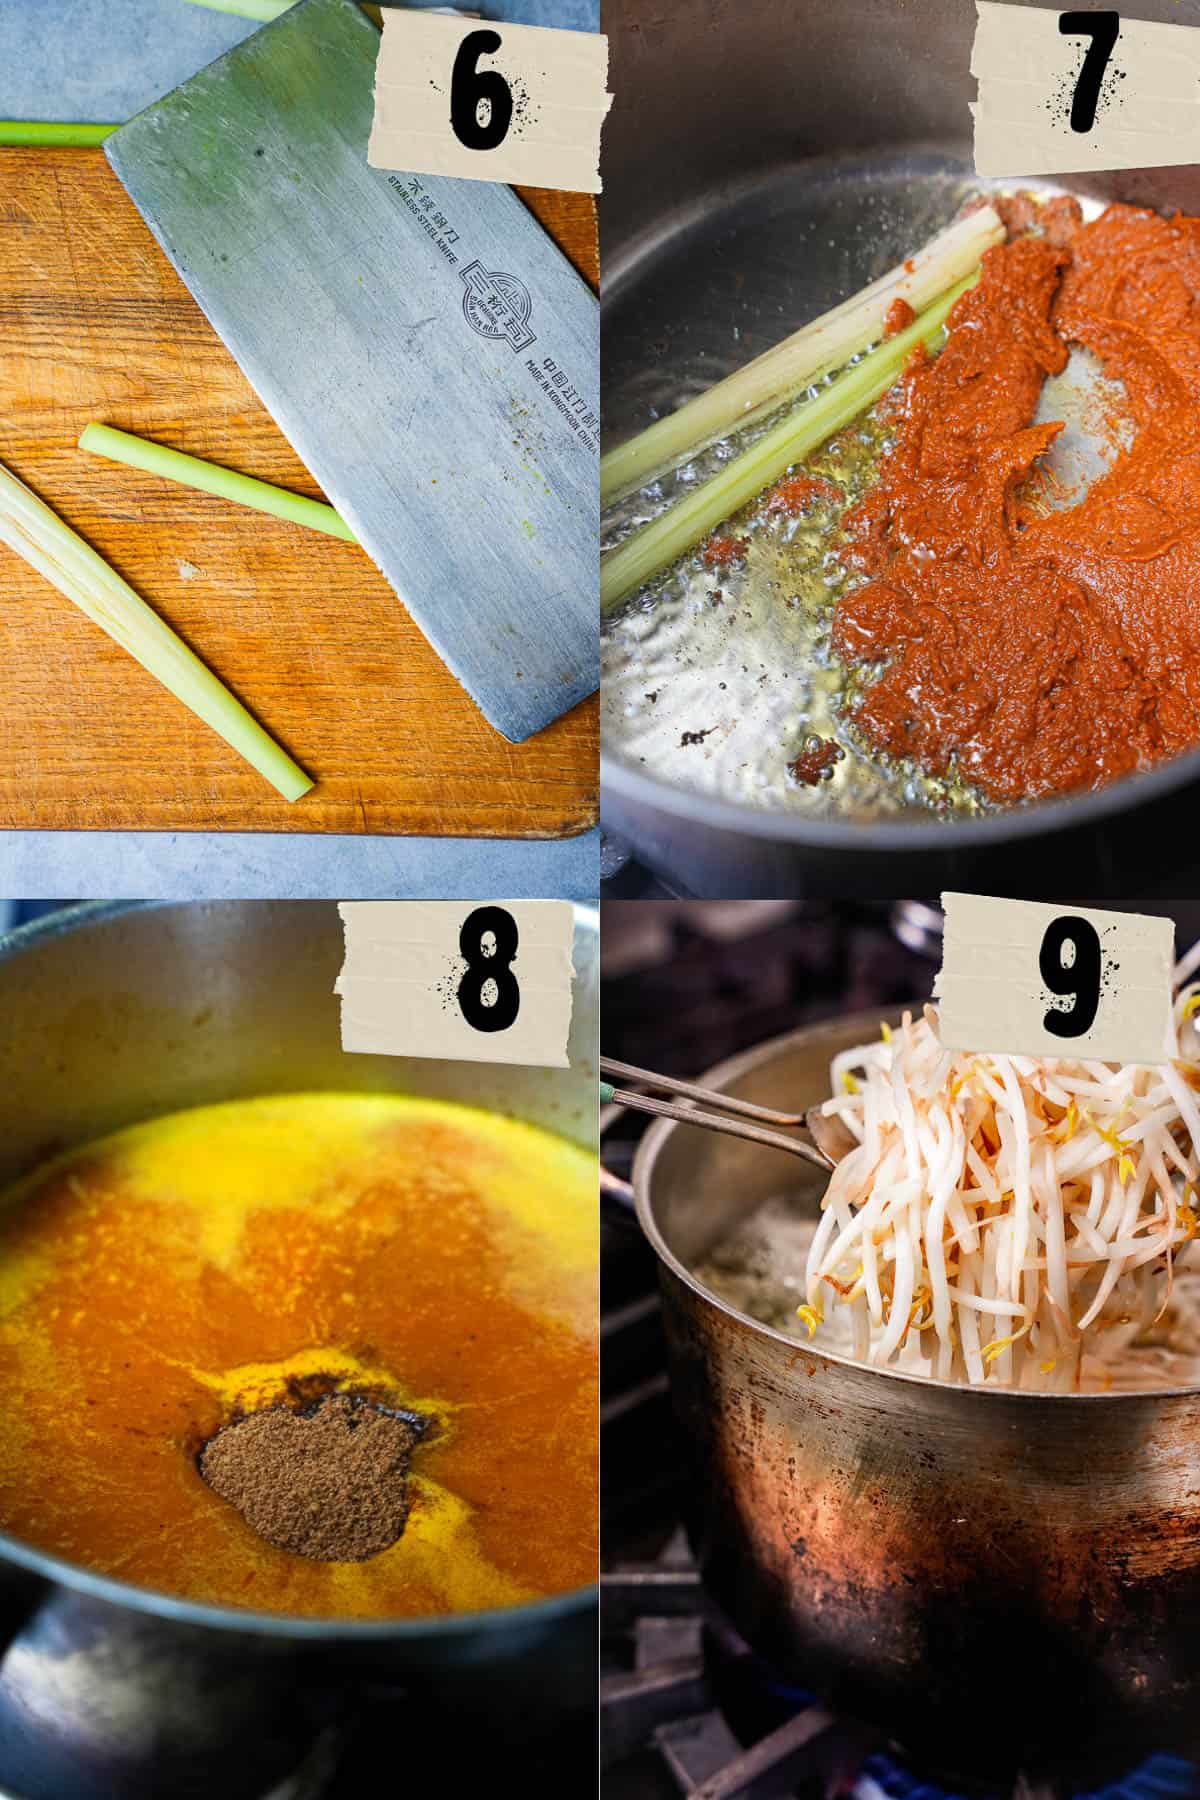 A set of four cooking steps:
1-A cleaver on a cutting board being used to bruise and crush lemongrass.
2- A pot of curry paste and lemongrass frying in oil.
3- Coconut sugar and other ingredients are added to the broth.
4- A pot of bean sprouts blanching in a pot on a stove with a spoon.